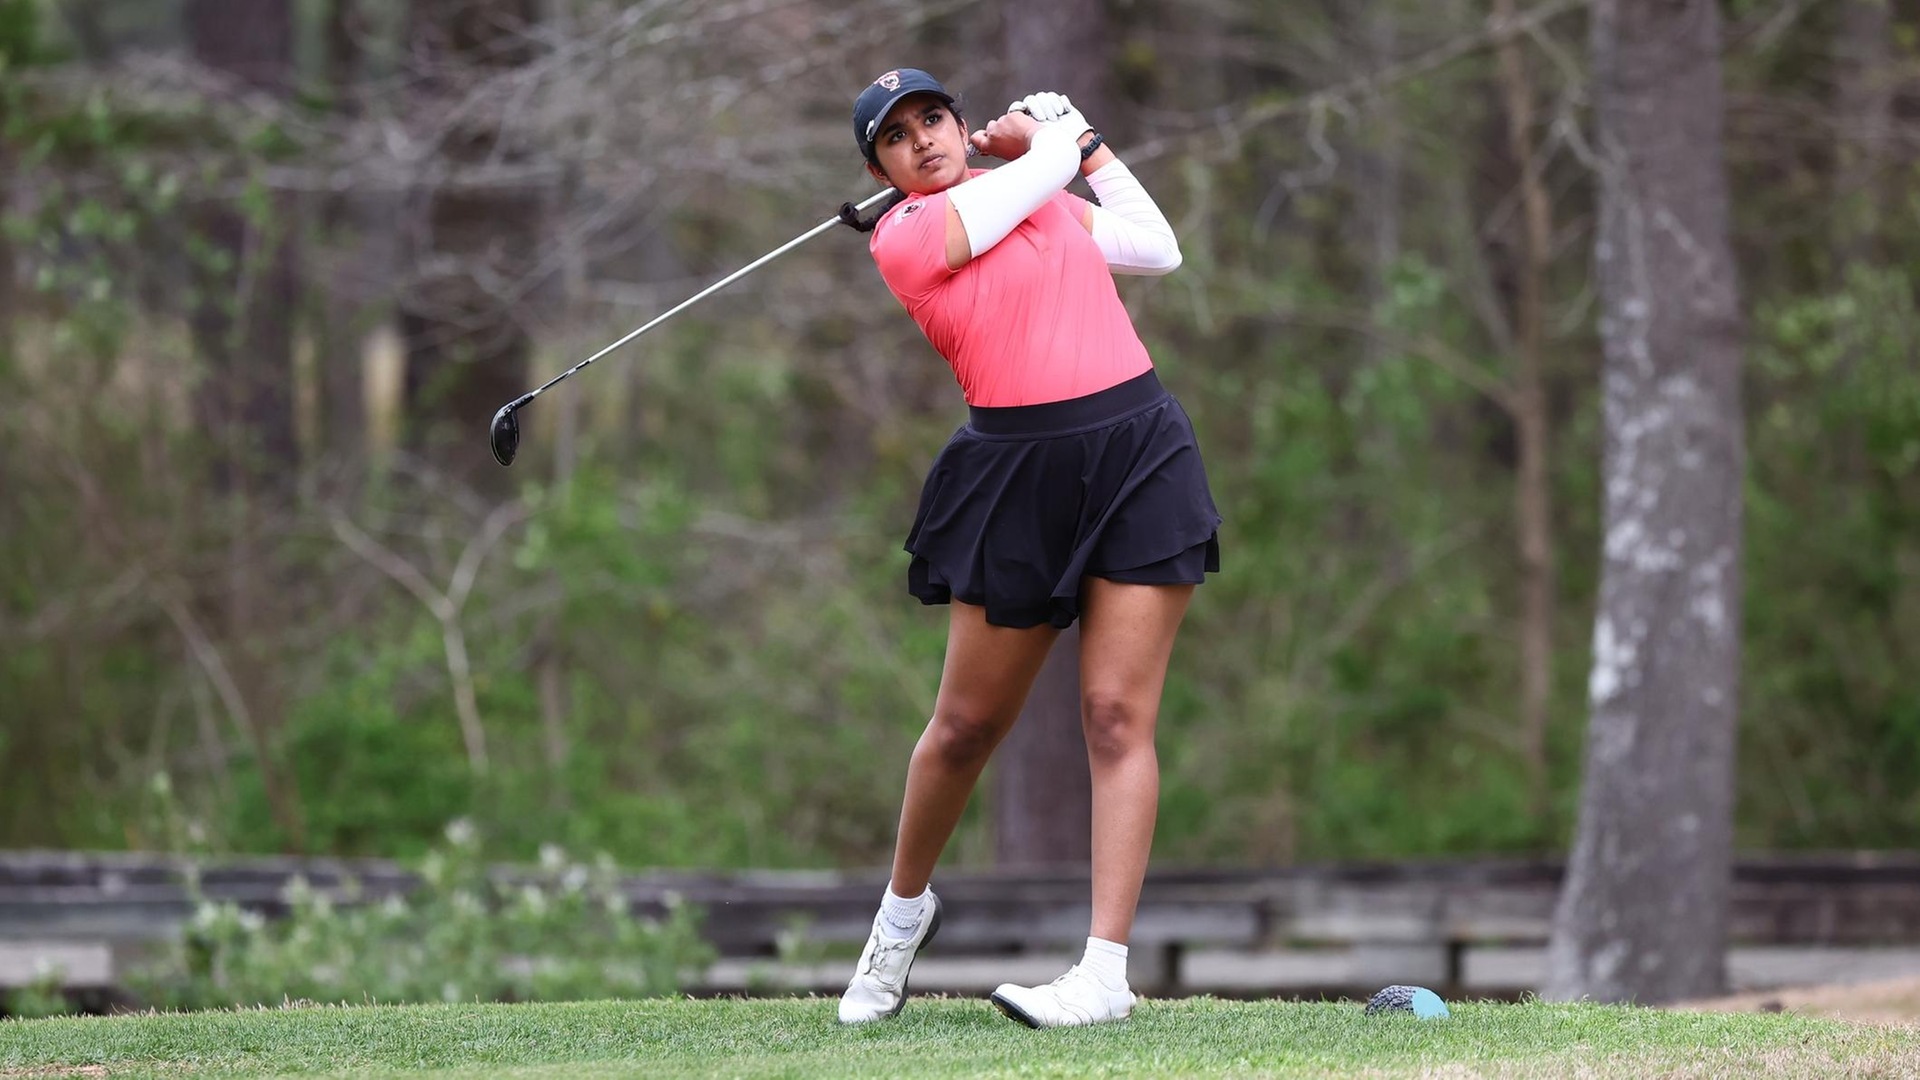 Tartans in Second Following Second Round of Deb Jackson Invitational